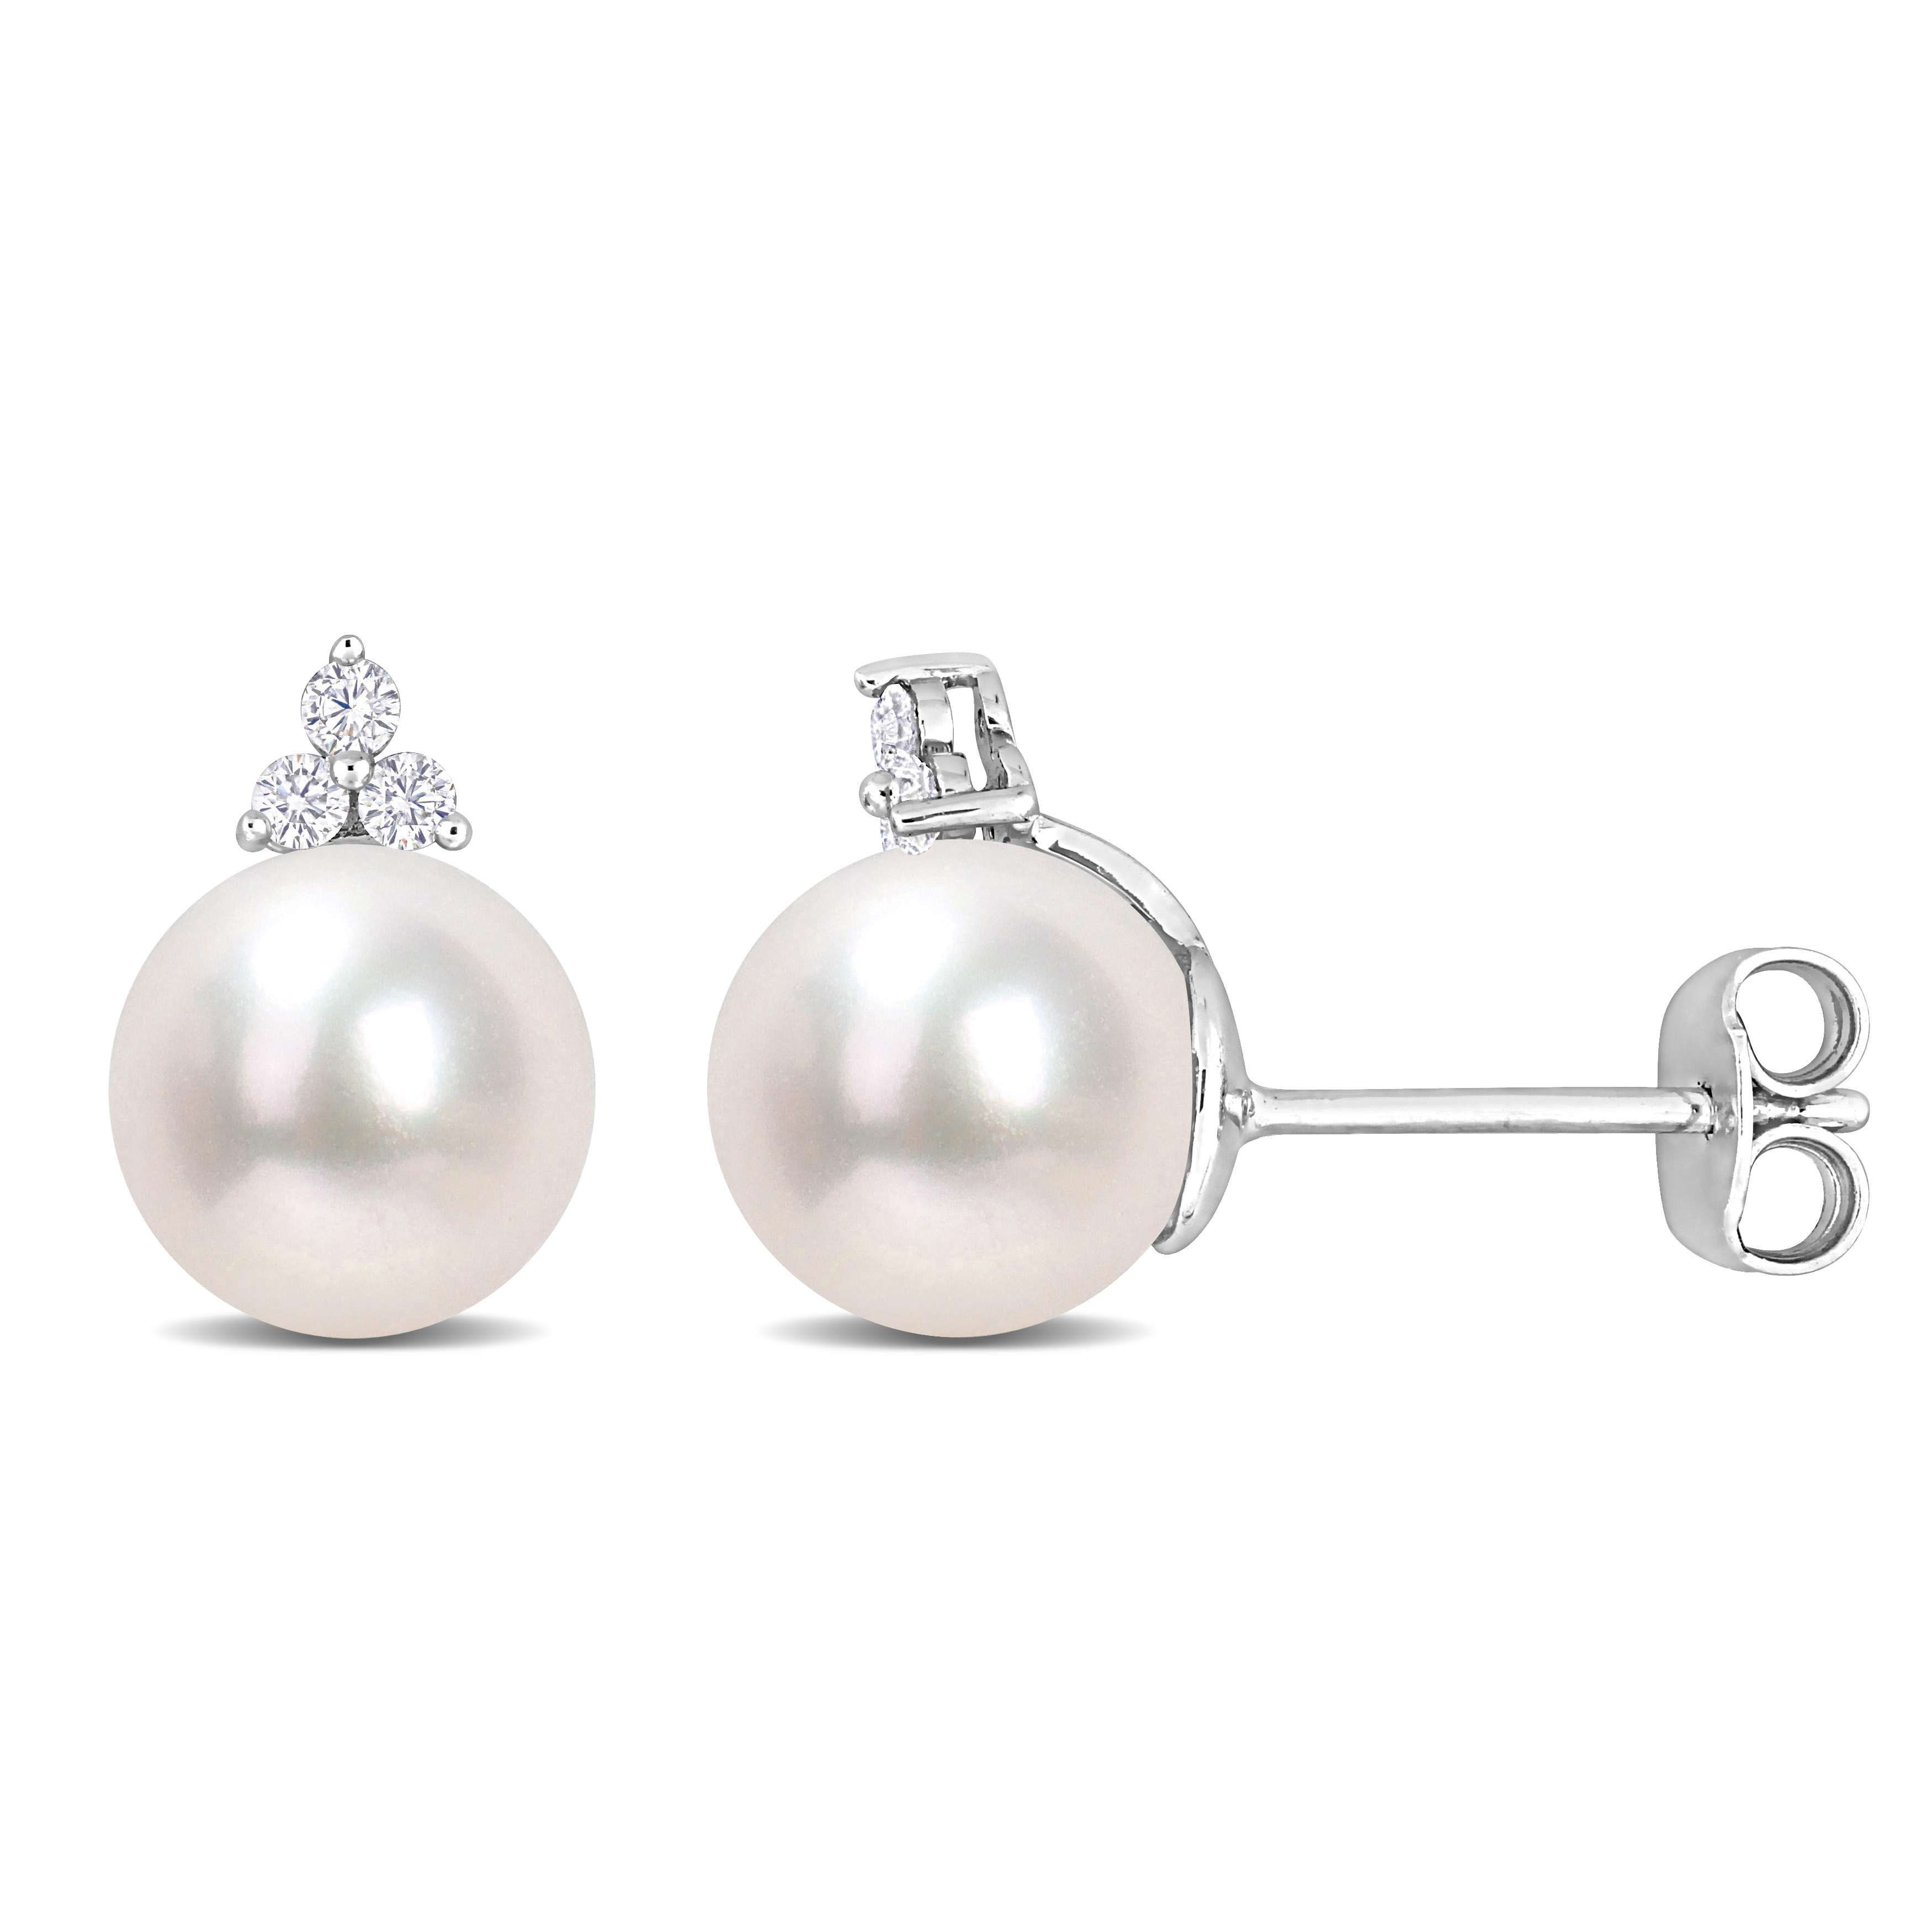 8-8.5 MM Freshwater Cultured Pearl and 1/8 CT TW Diamond Pearl Stud Earrings in Sterling Silver